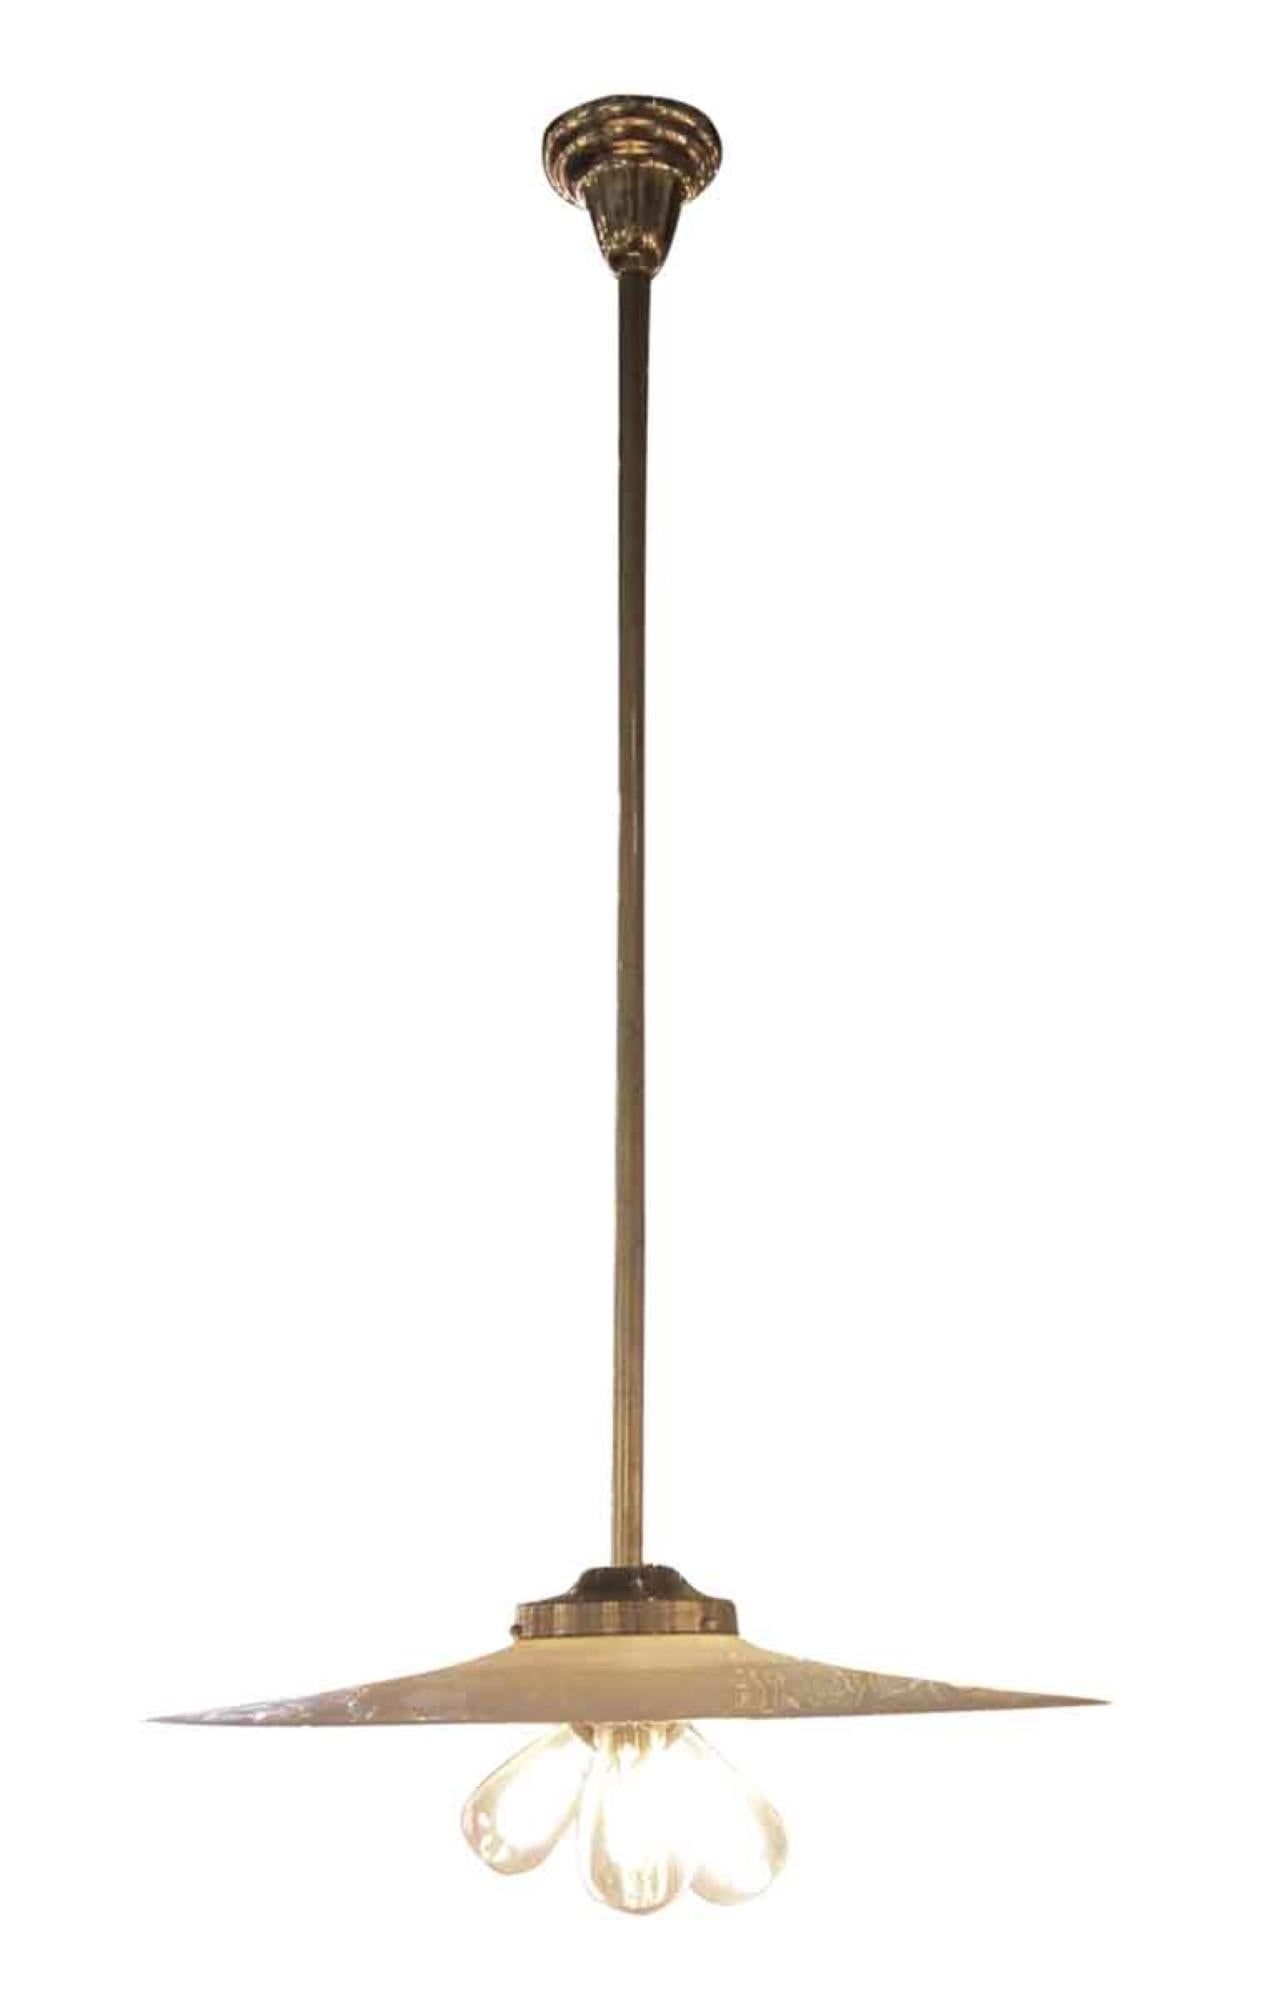 1930s three socket Industrial Benjamin rewired pendant light and new brass fitter, pole and canopy. Even though it's from the Industrial Era it has a certain Mid-Century Modern look. This light is wired and ready to ship. Please note, this item is